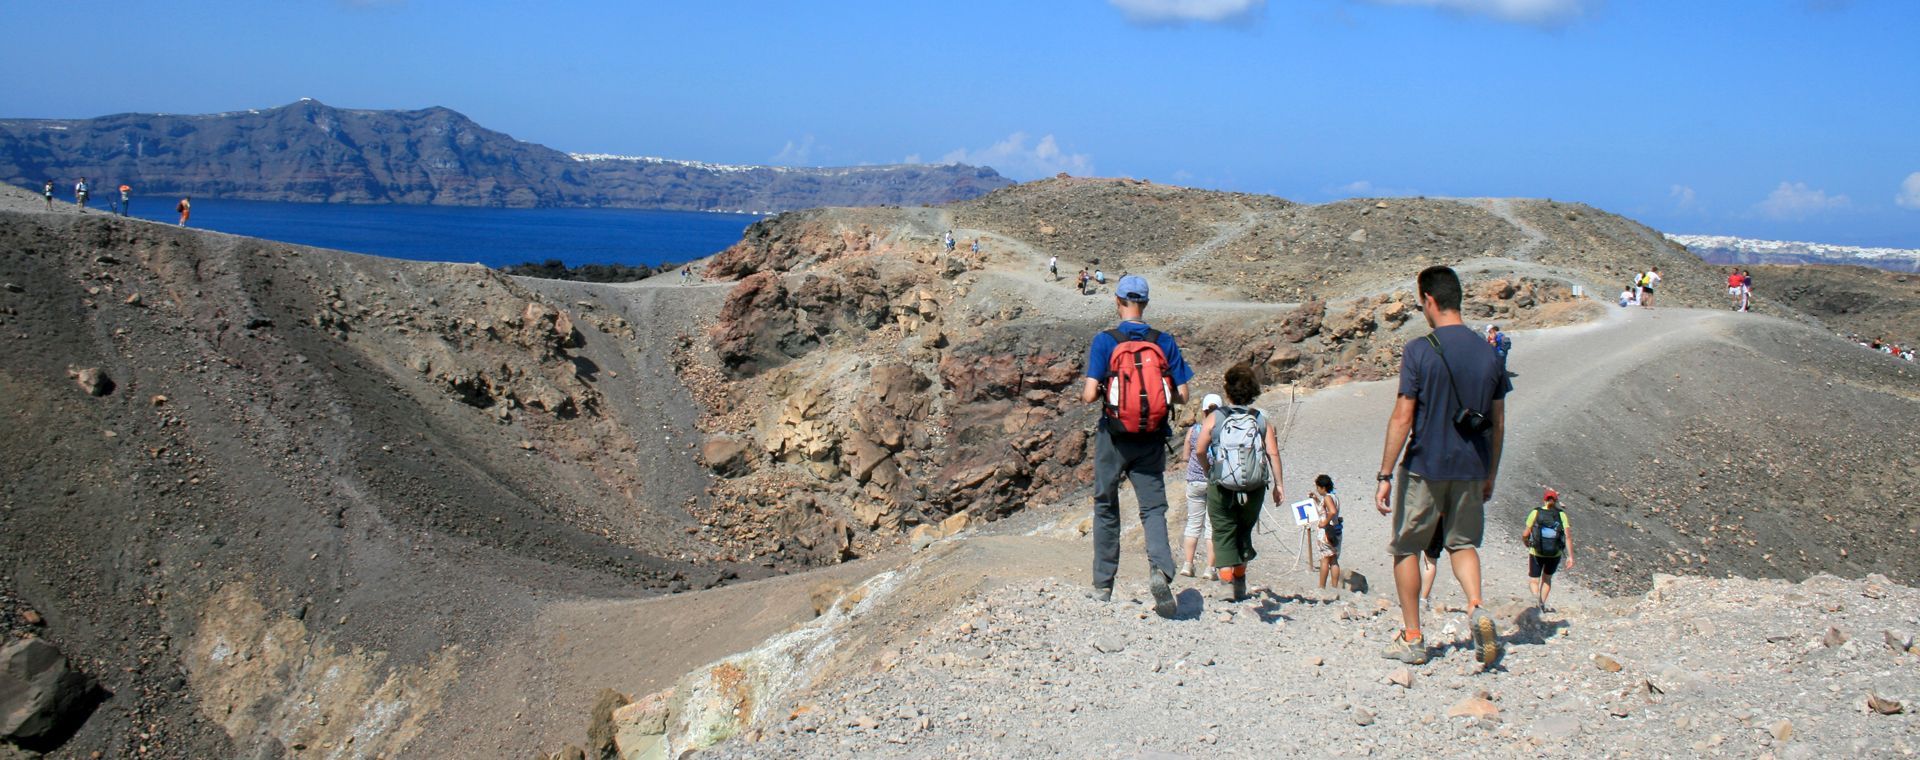 Hikers on the island of Thirasia in the Cyclades